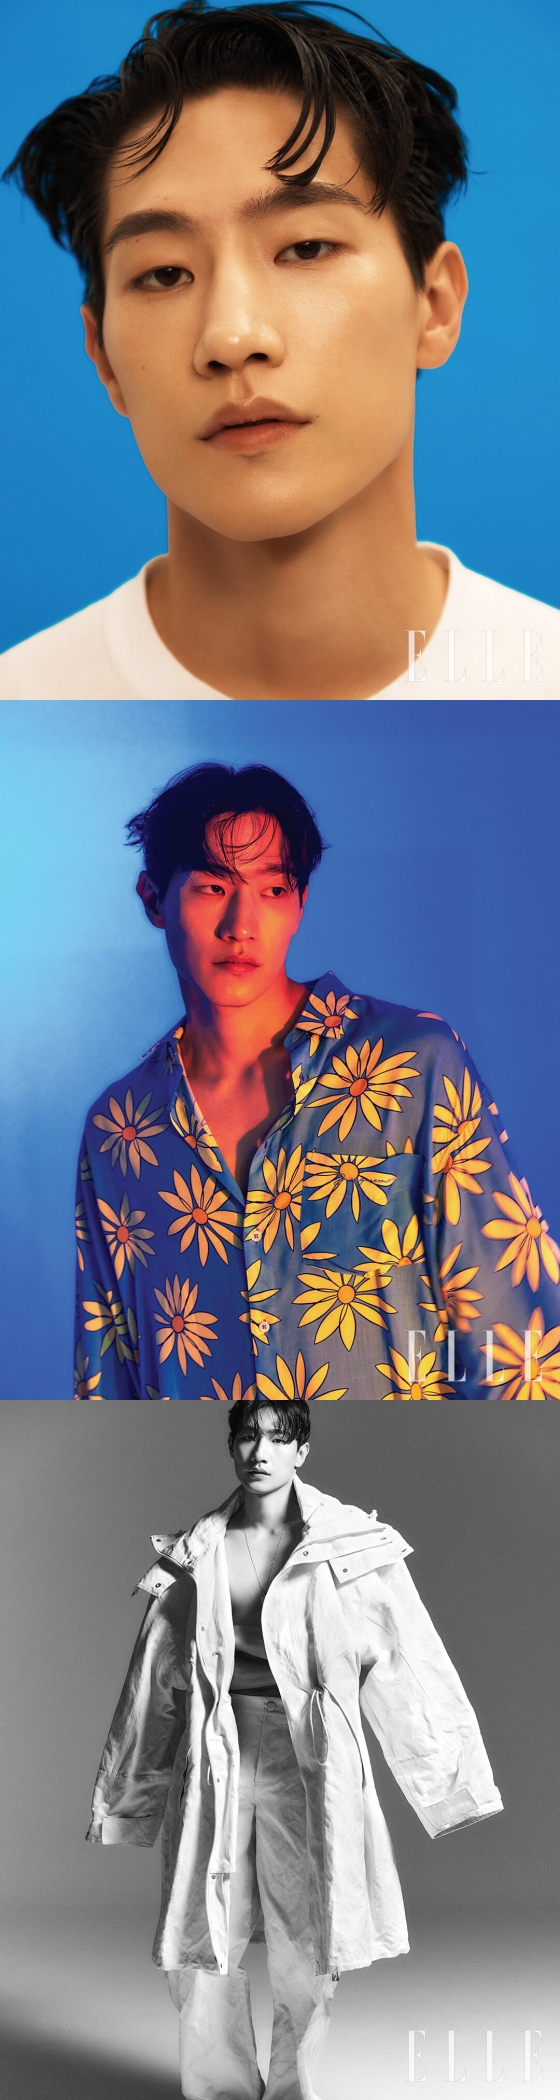 On the 21st, Elle Korea released a picture of Noh Sang-hyun, who has also been active as a fashion model in the past, and is the back door that he finished shooting smoothly with his extraordinary digestive power and charisma.In an interview after the filming, I asked the audiences feelings of Pachinko and said, I am really excited and enjoying it. When I first monitored, I saw fresh production and sights I missed.I am eyed by the unique gaze of foreigners looking at visual beauty, music, and Korea. Noh Sang-hyun, who chose the ending scene in episode 4 as the most deeply left scene in his mind in Pachinko, which is attracting attention as a sophisticated production, said, The sequence that Solomon (Jinha Boon) who ran out of the company runs through the rain and dances like crazy in front of the bus king band is so cool.I think it is perfect flow from the scene of Yoon Jung-jungs upcoming scene in Busan sea. When asked about the secret of the back-to-back role of Pachinko, Noh Sang-hyun replied, I do not have much experience in acting, and I can feel that there is no place to feel great trust in actor Noh Sang-hyun.It seems to be the most important thing for the actor to know how long he is alive for a short time.Thats why I was really happy when director Justin told me he was a true (Honest) actor while filming Pacinko.I felt like I wanted to act honestly every When My Love Blooms with my heart, he said, expressing his confidence in acting.On the other hand, Apple TV Plus original series Pachinko Season 1, which Noh Sang-hyun is appearing, will be completed after the eighth episode released next Friday.